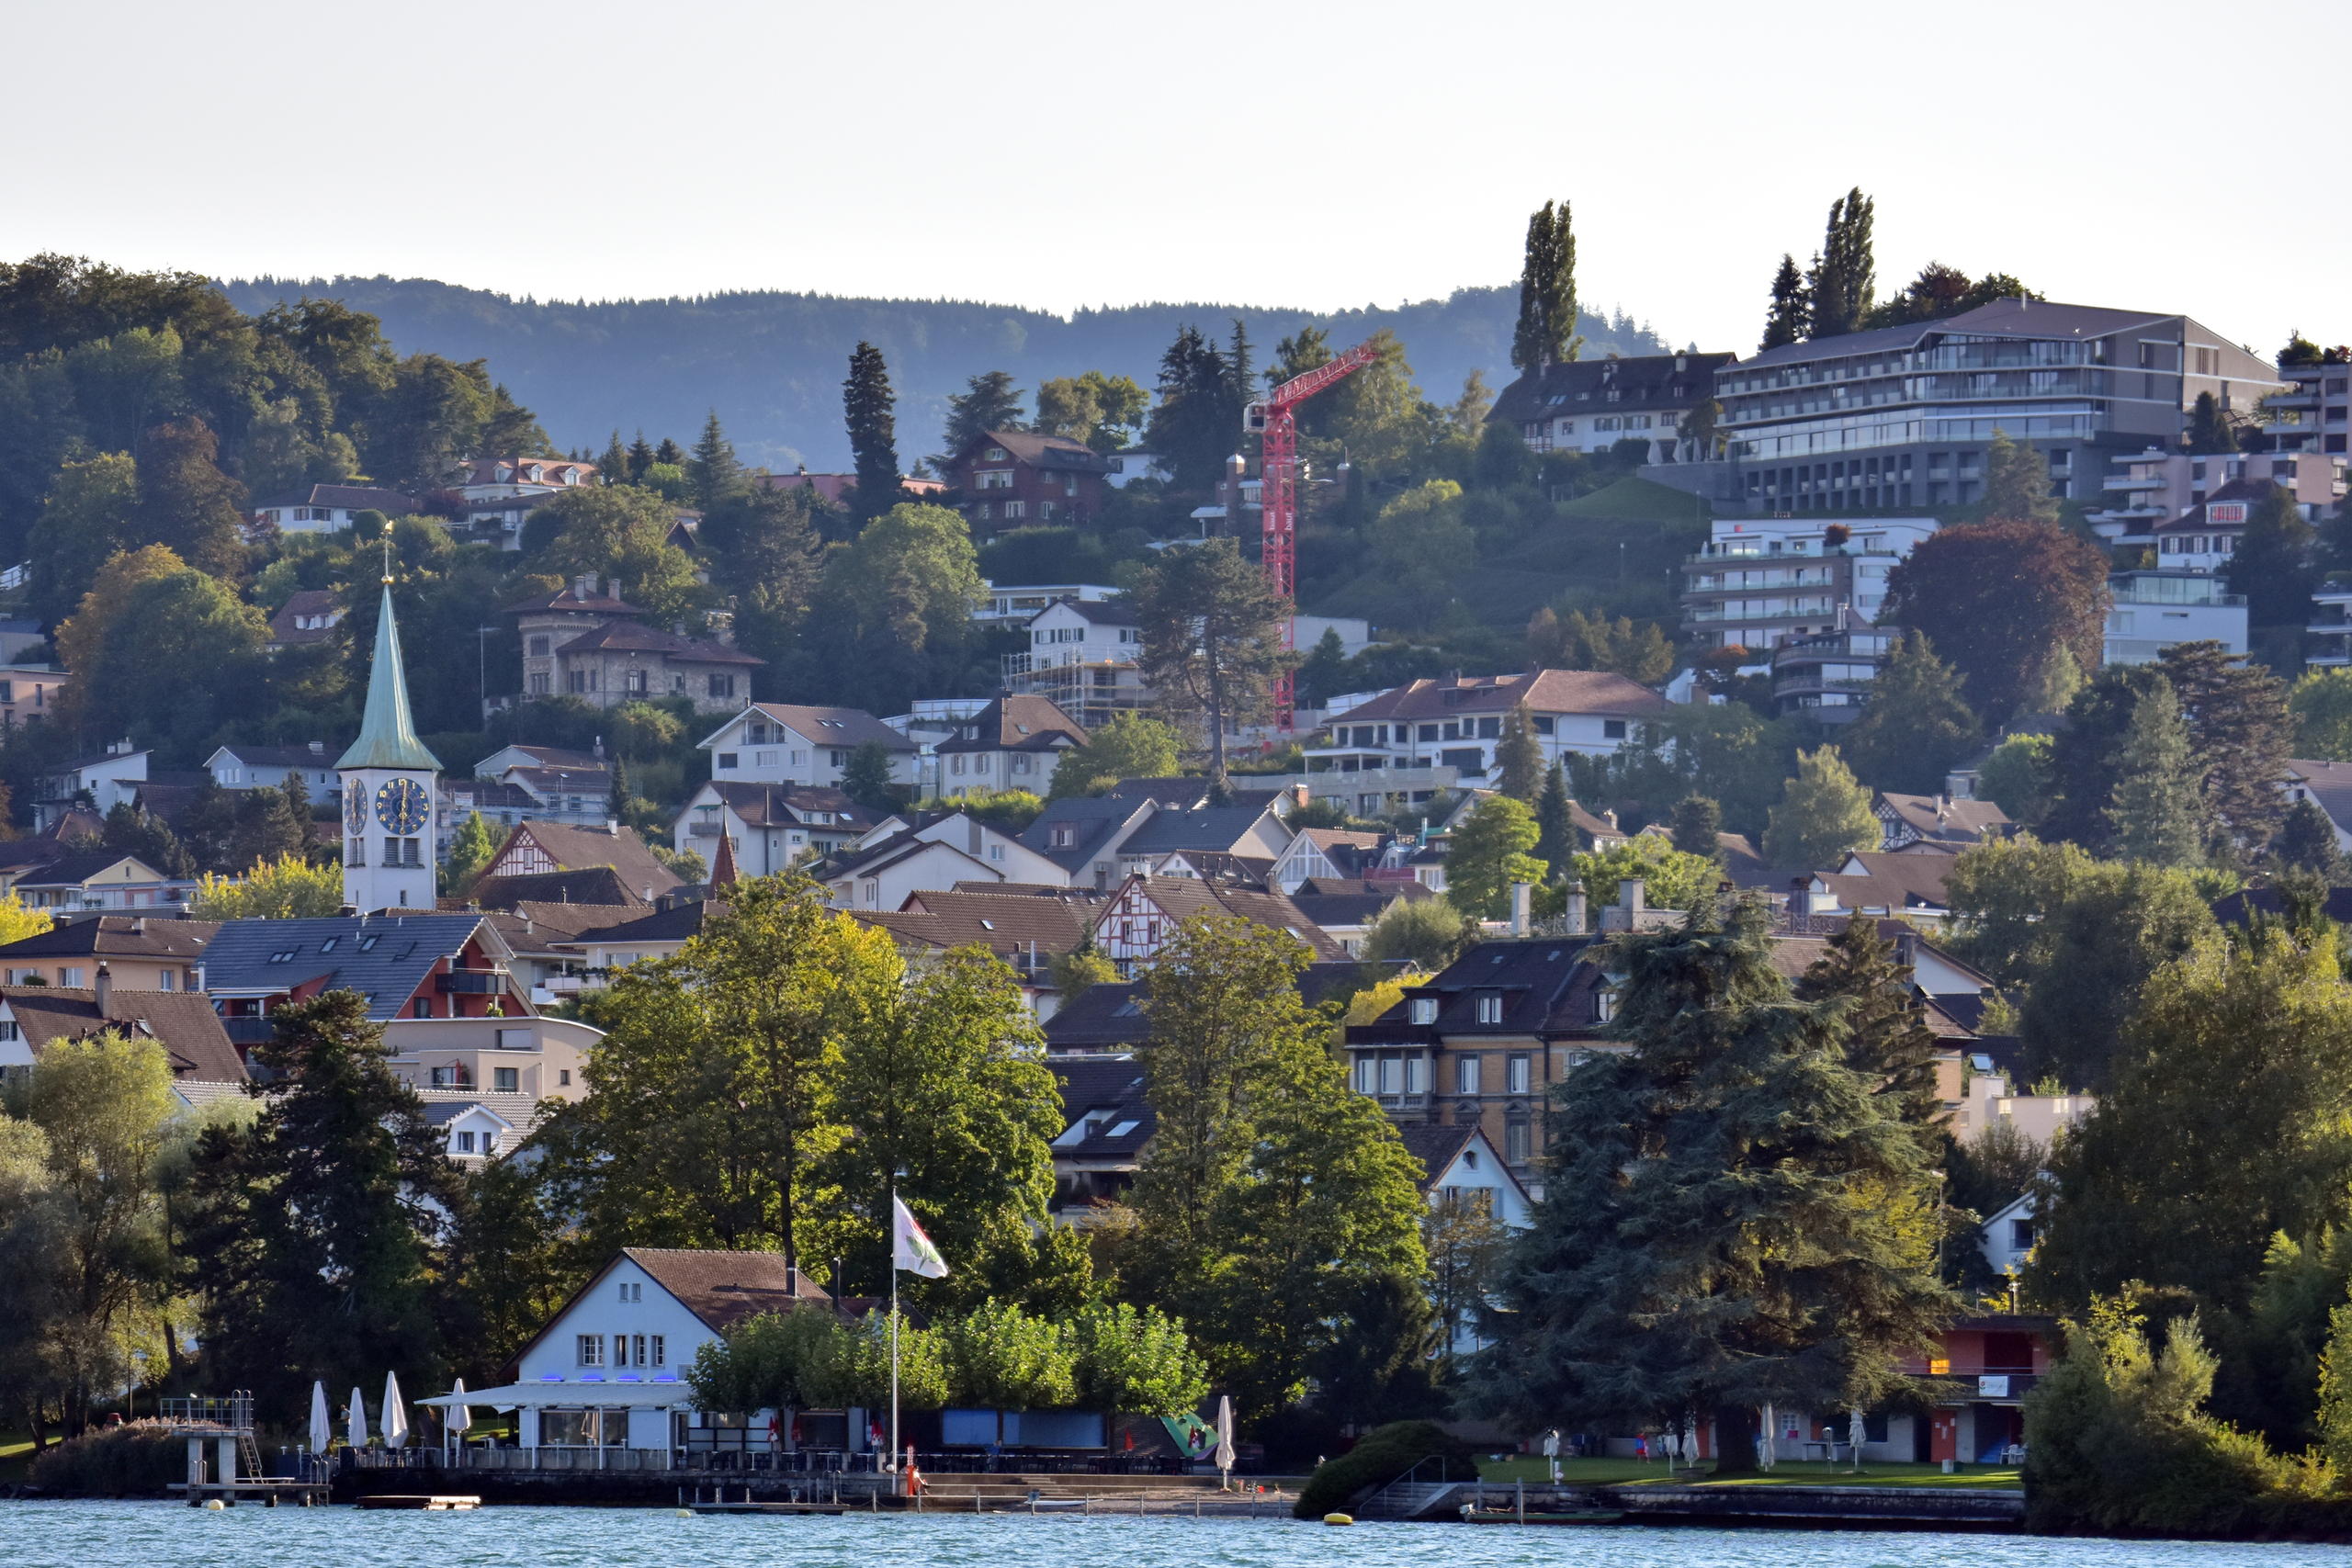 The city of Rüschlikon as seen from Lake Zurich